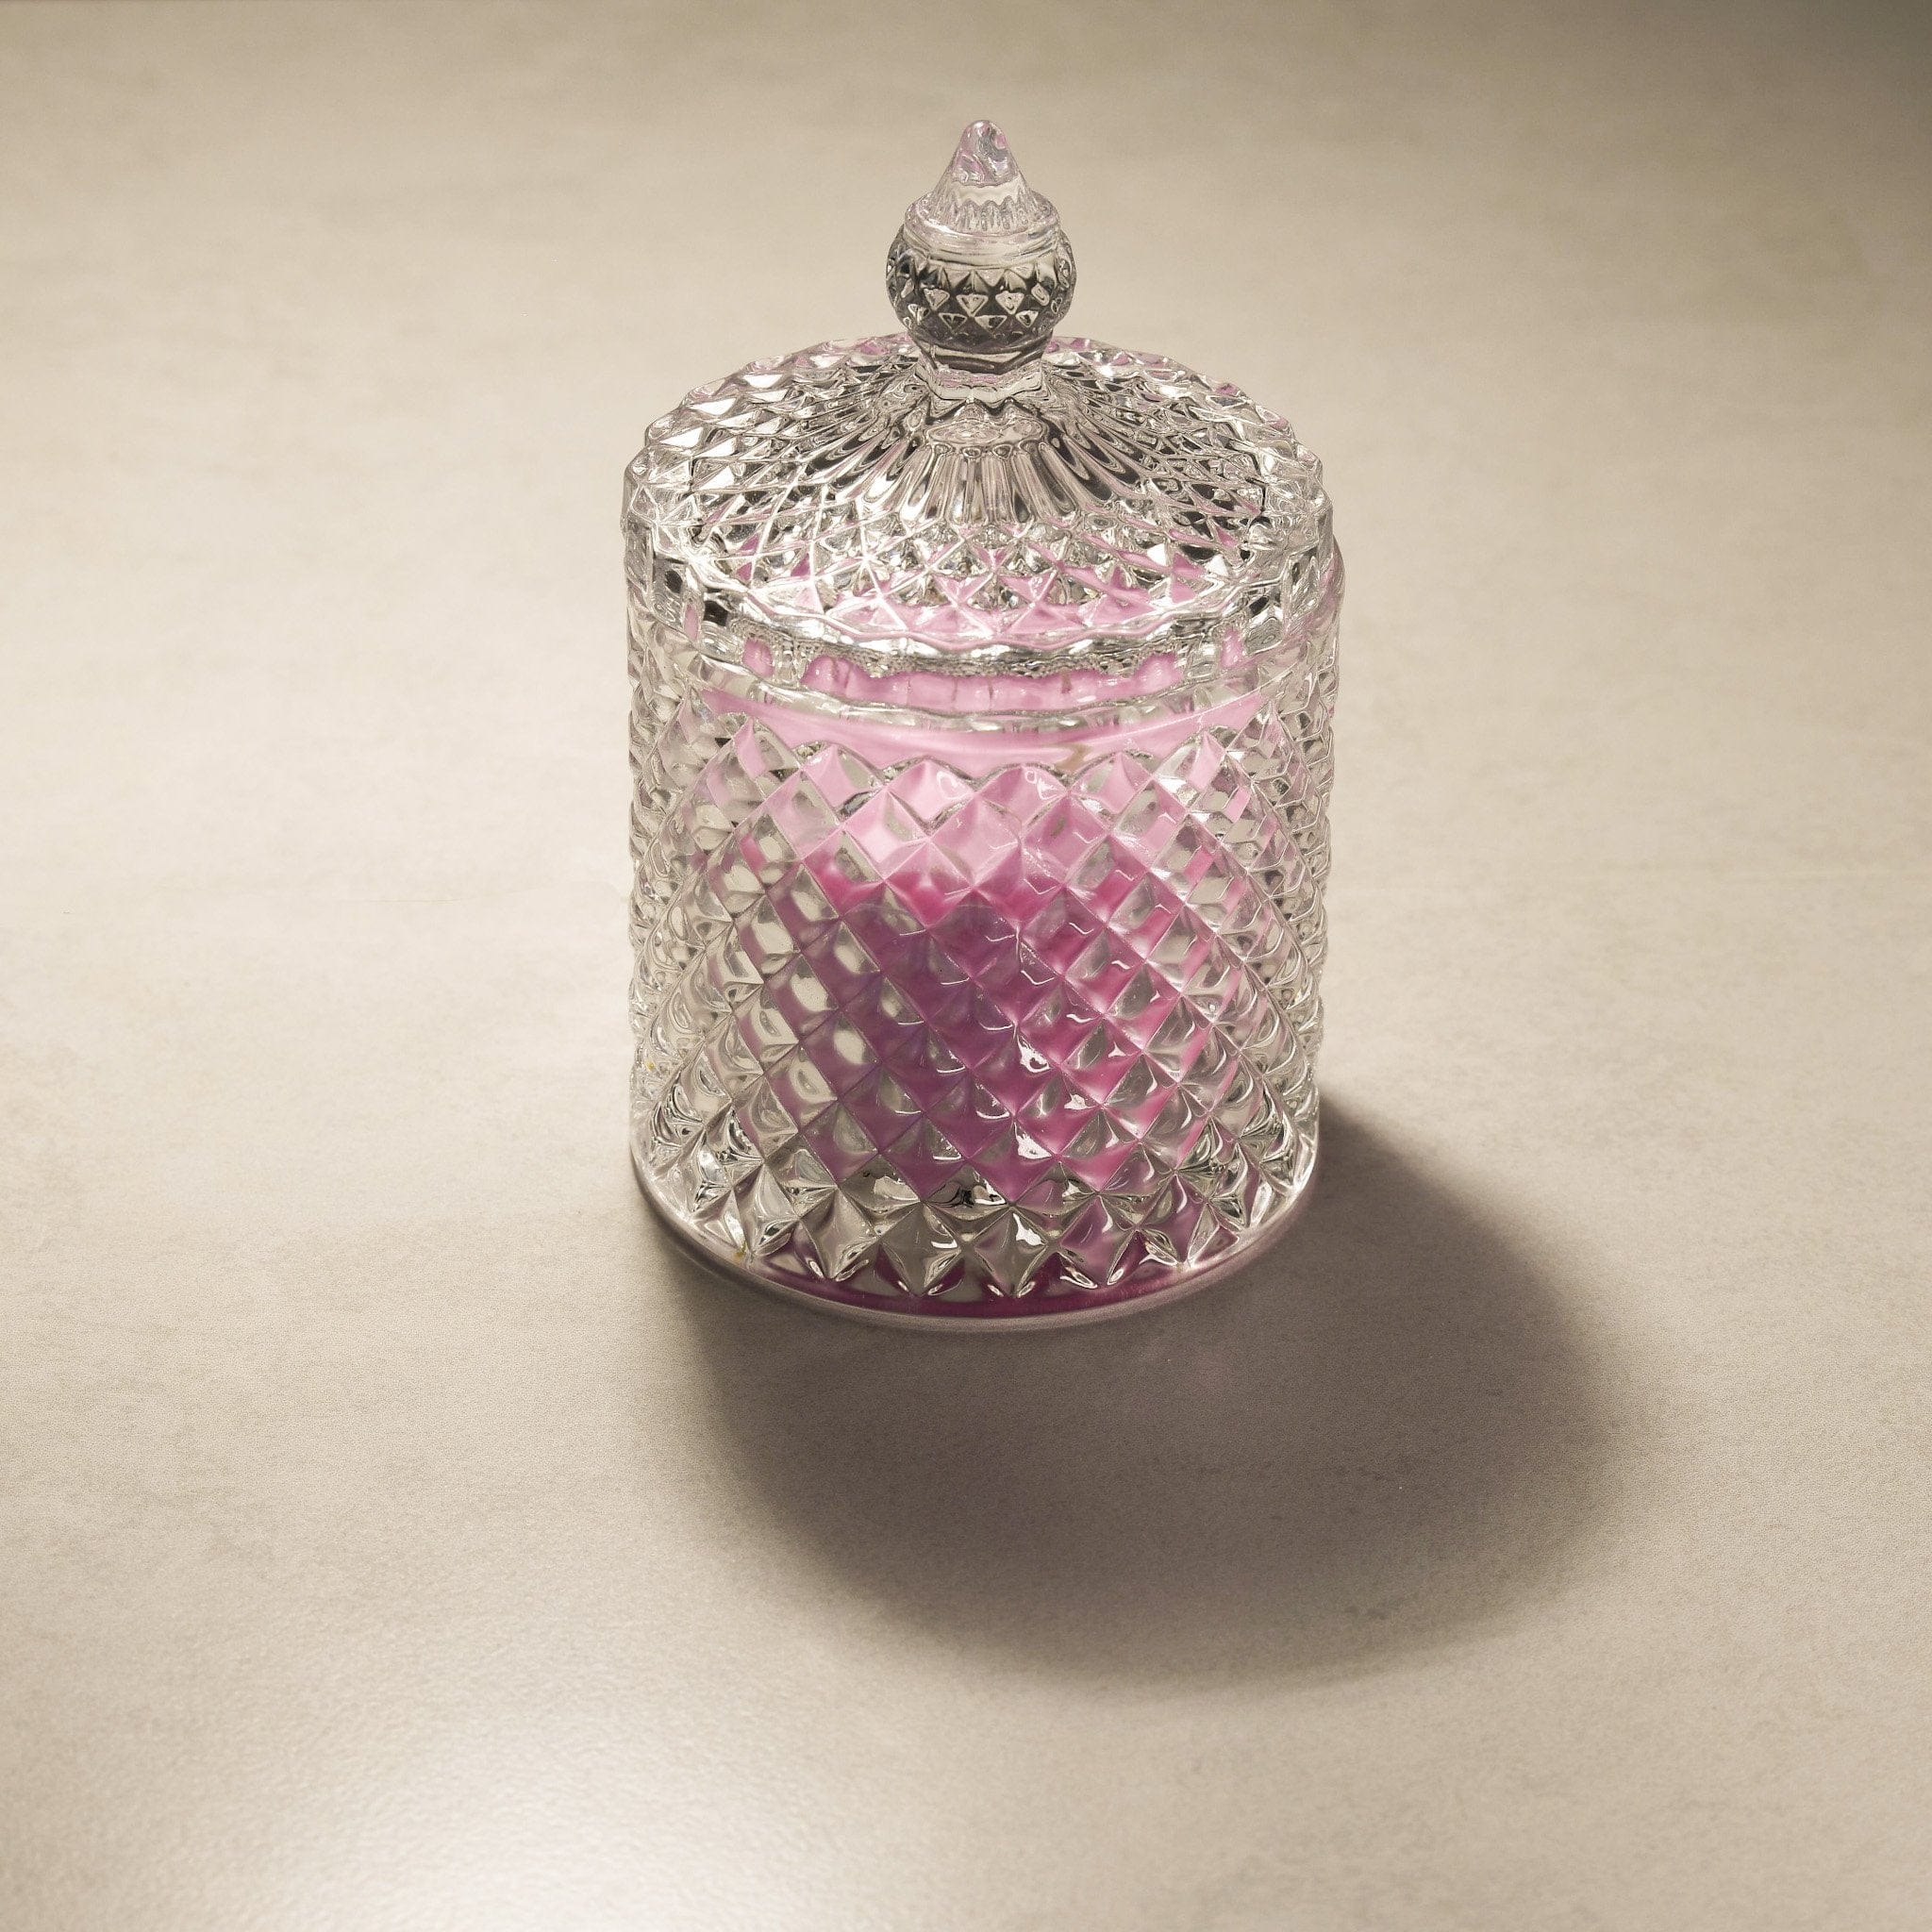 Sandalwood and Rose Scented Glass jar for Diwali Gifting